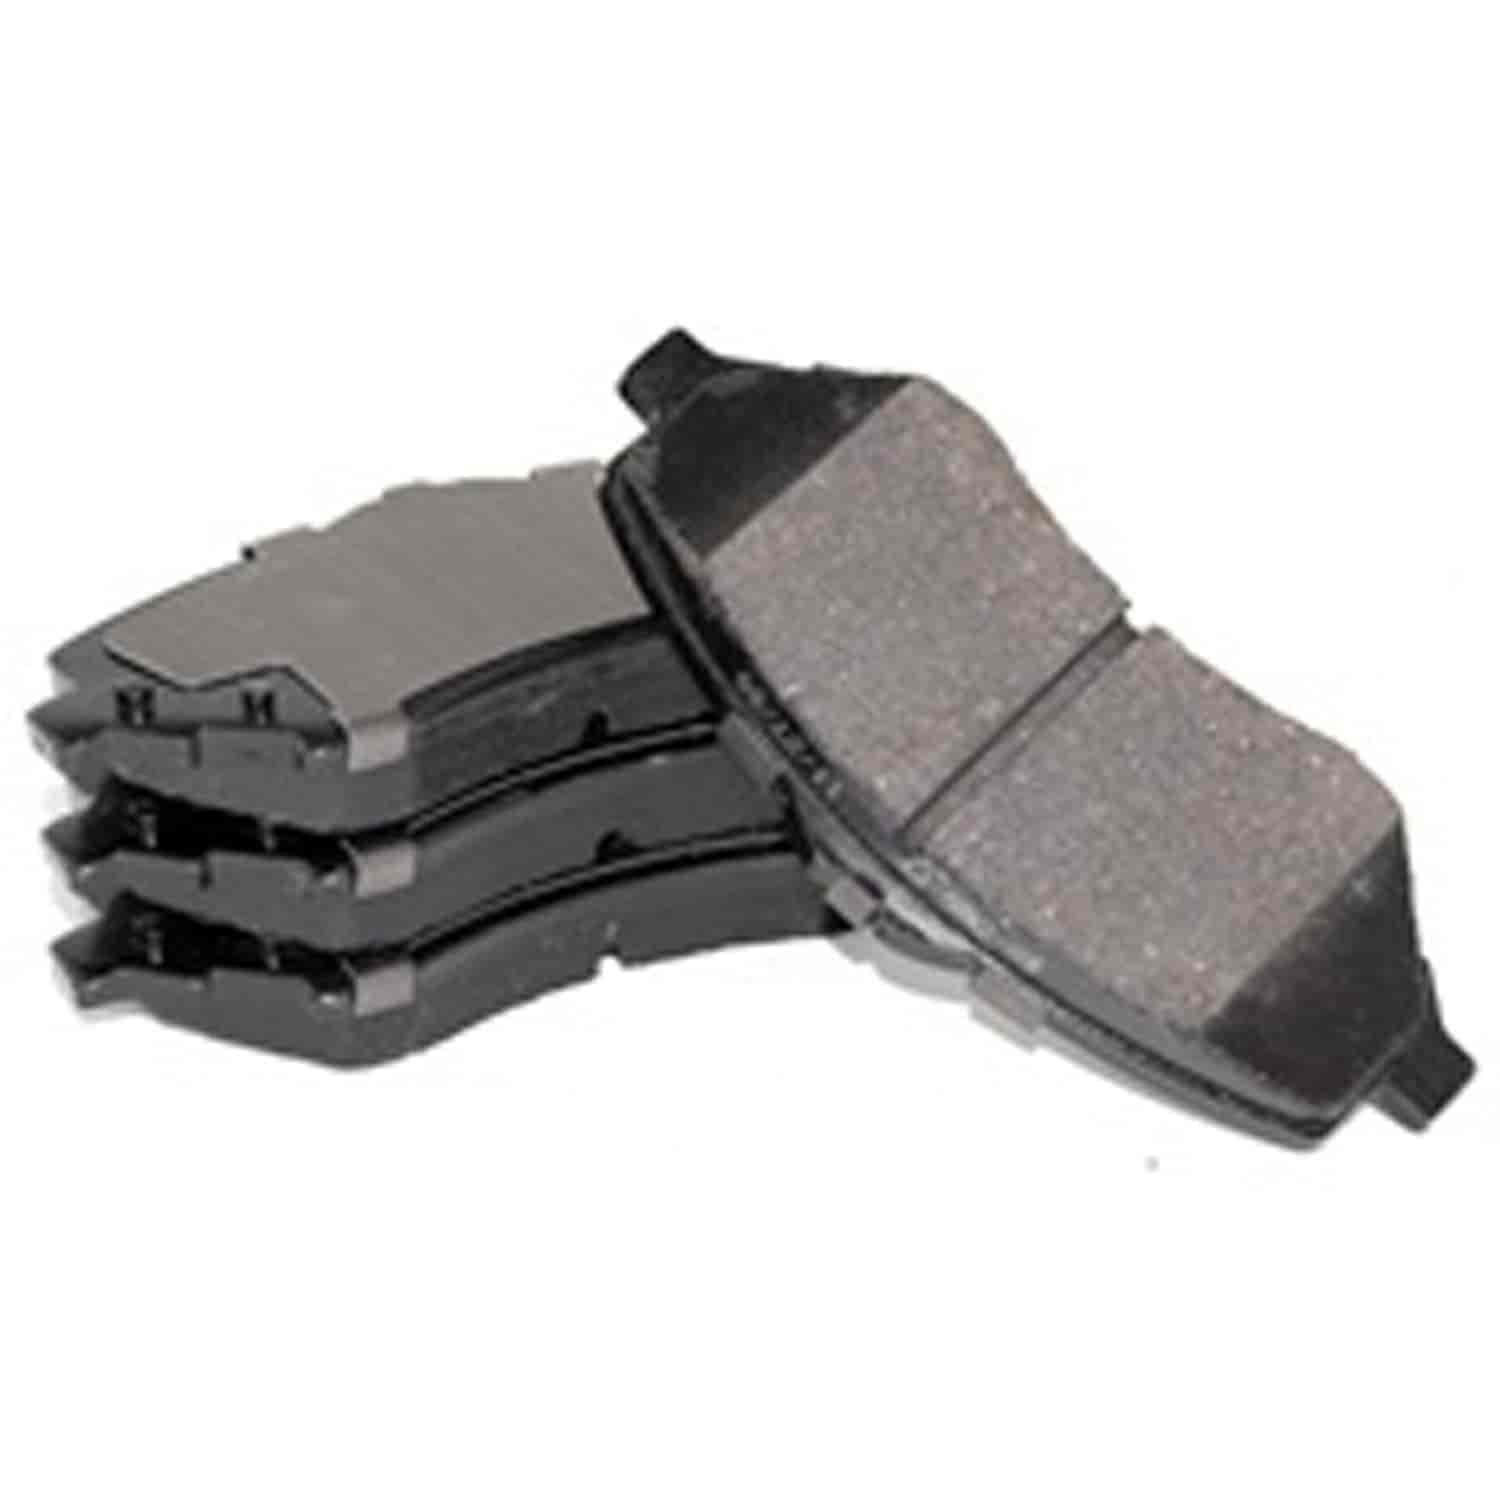 This set of rear disc brake pads from Omix-ADA fits 09-12 Jeep Compass and Patriots with 11.8 inch rotors.